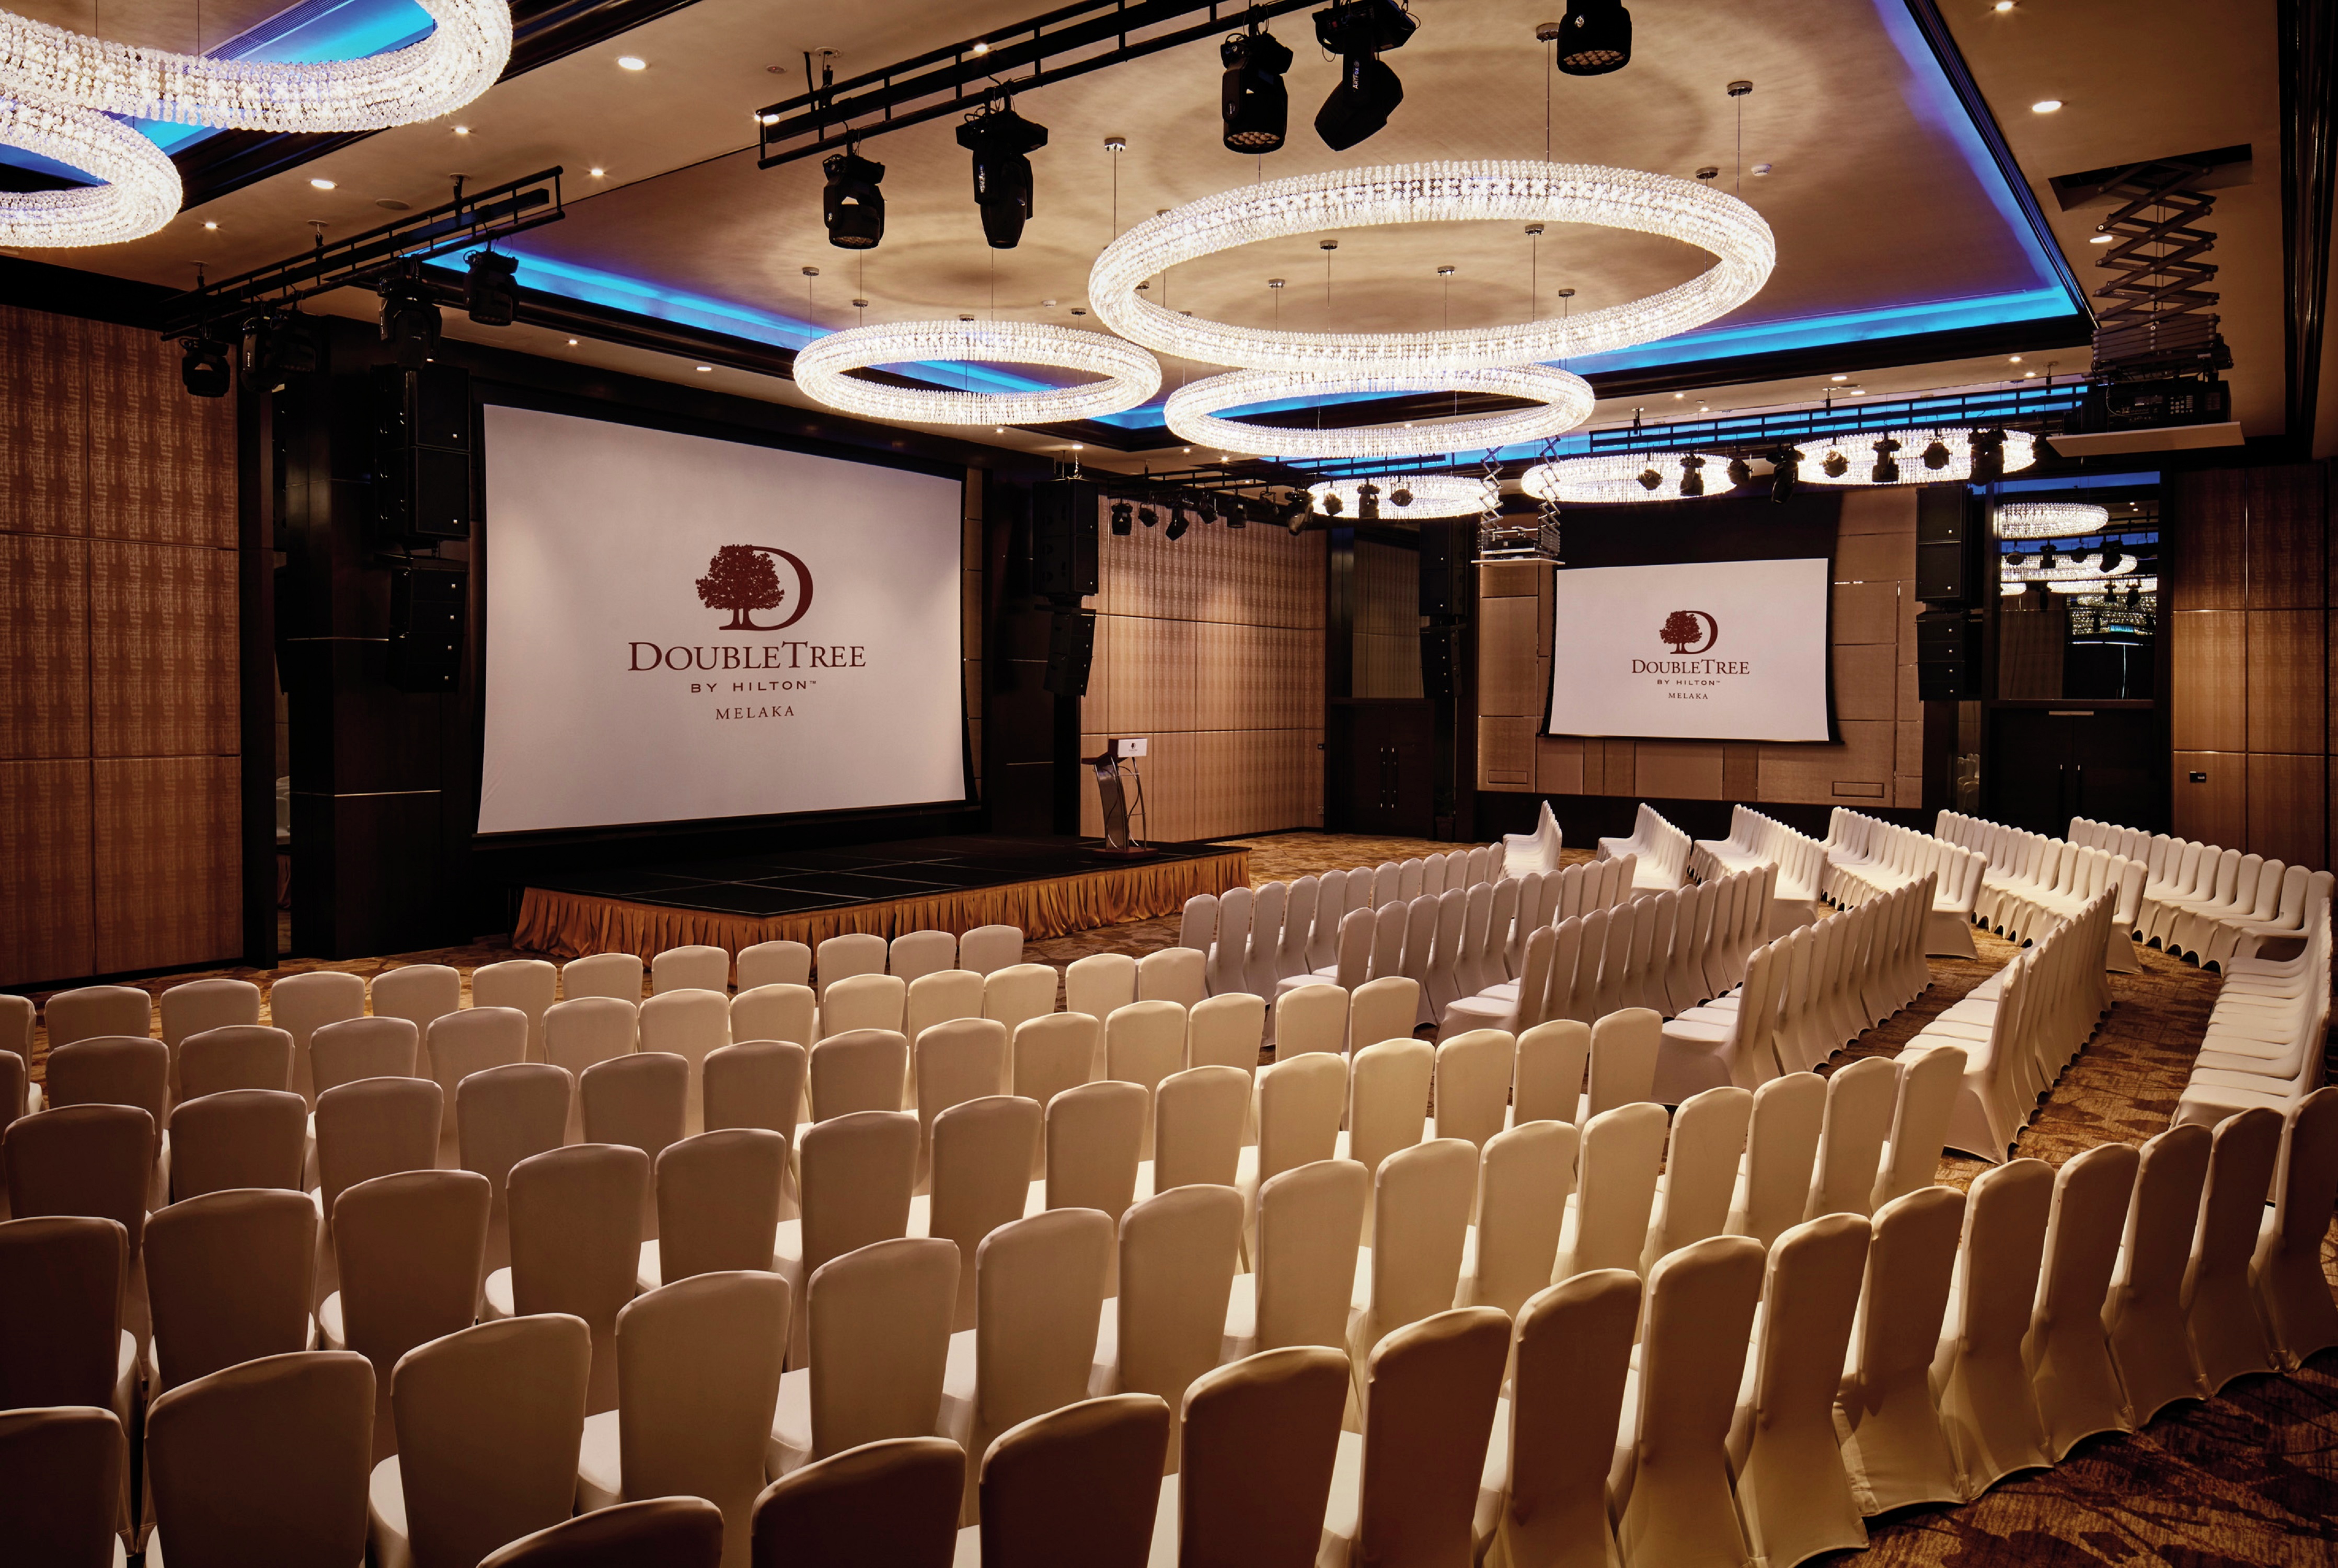 Ballroom Theater Setup with Two Projector Screens